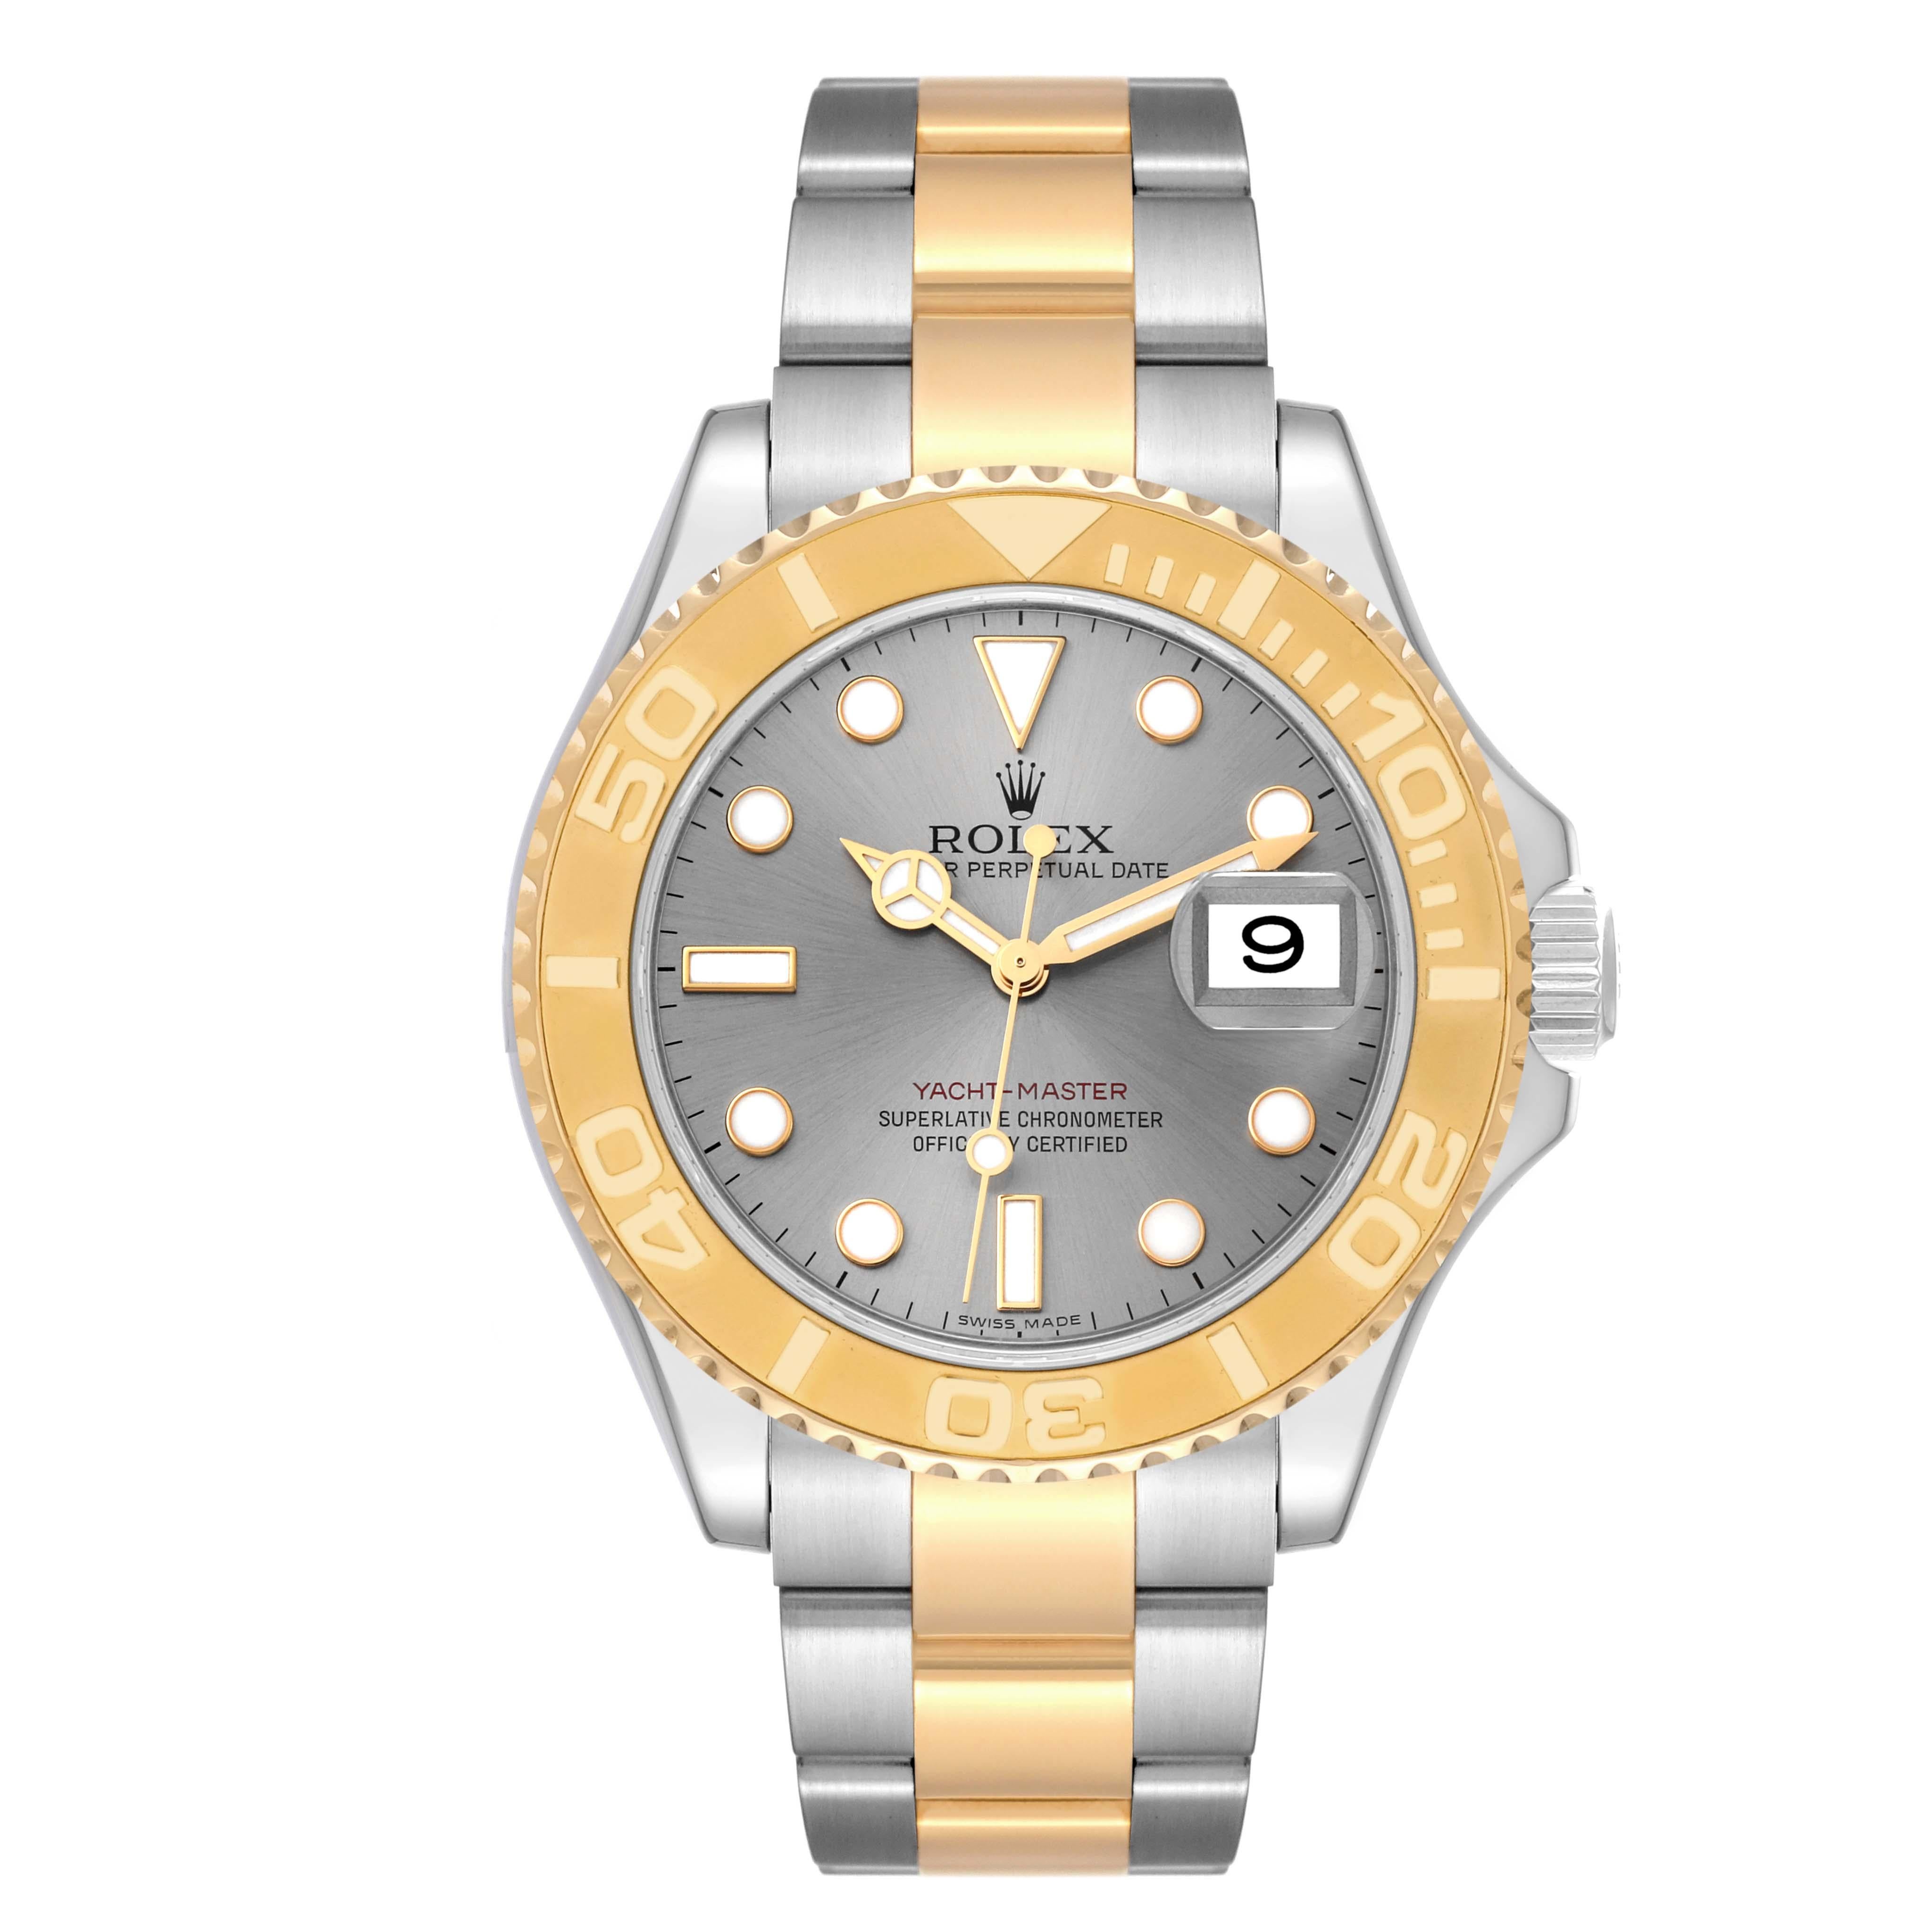 Rolex Yachtmaster Steel Yellow Gold Slate Dial Mens Watch 16623 Box Card. Officially certified chronometer automatic self-winding movement. Stainless steel case 40.0 mm in diameter. Rolex logo on a crown. 18k yellow gold special time-lapse